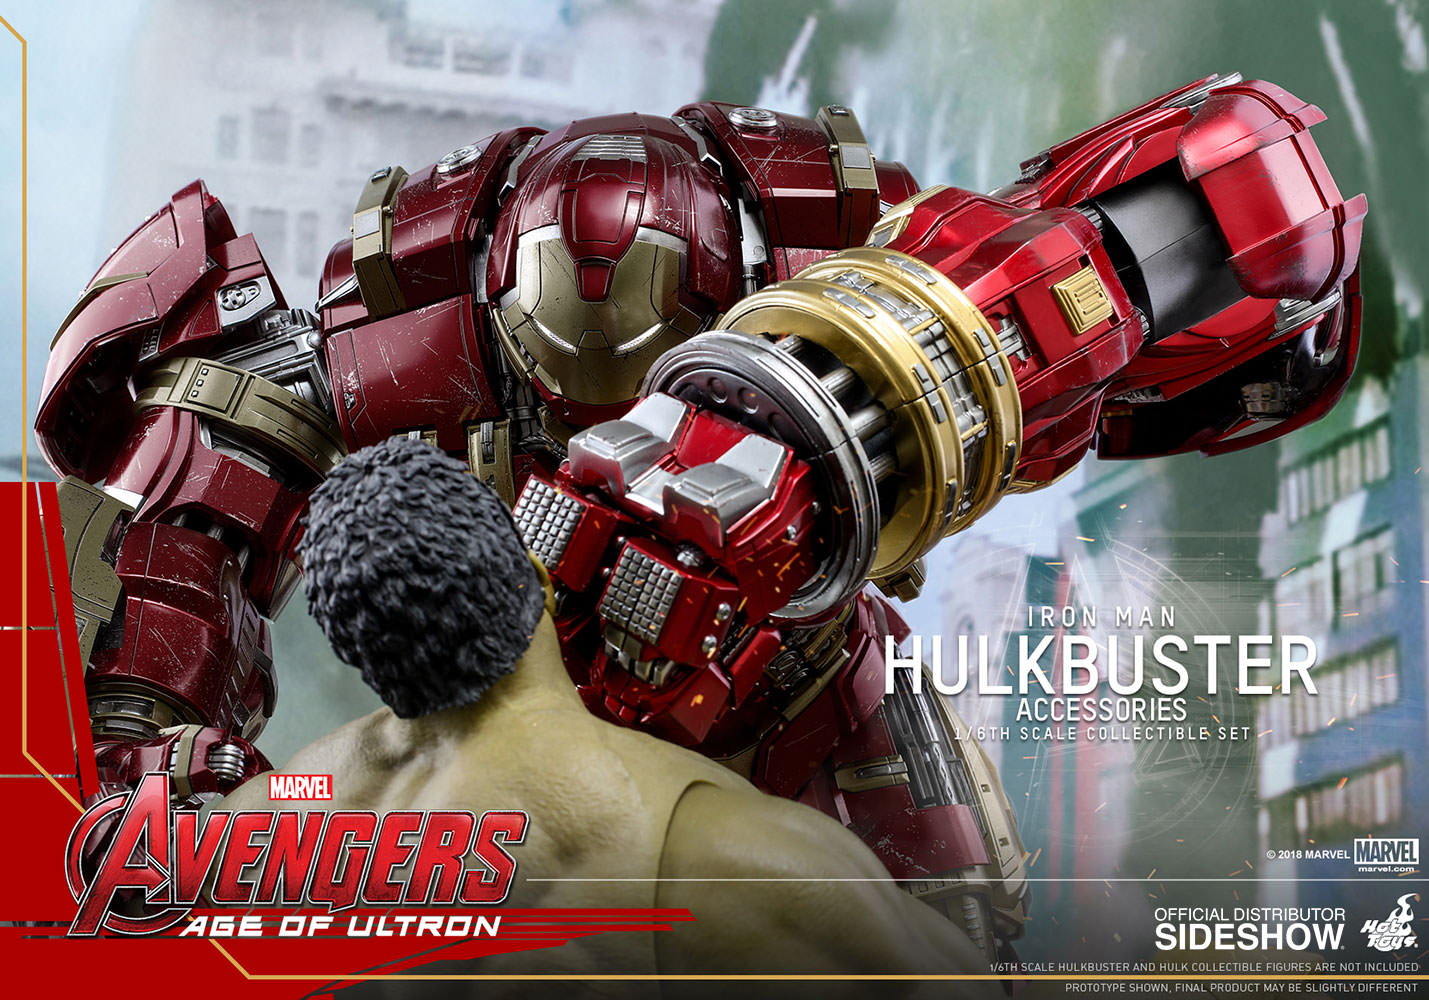 Hulkbuster Accessories Sixth Scale Figure by Hot Toys